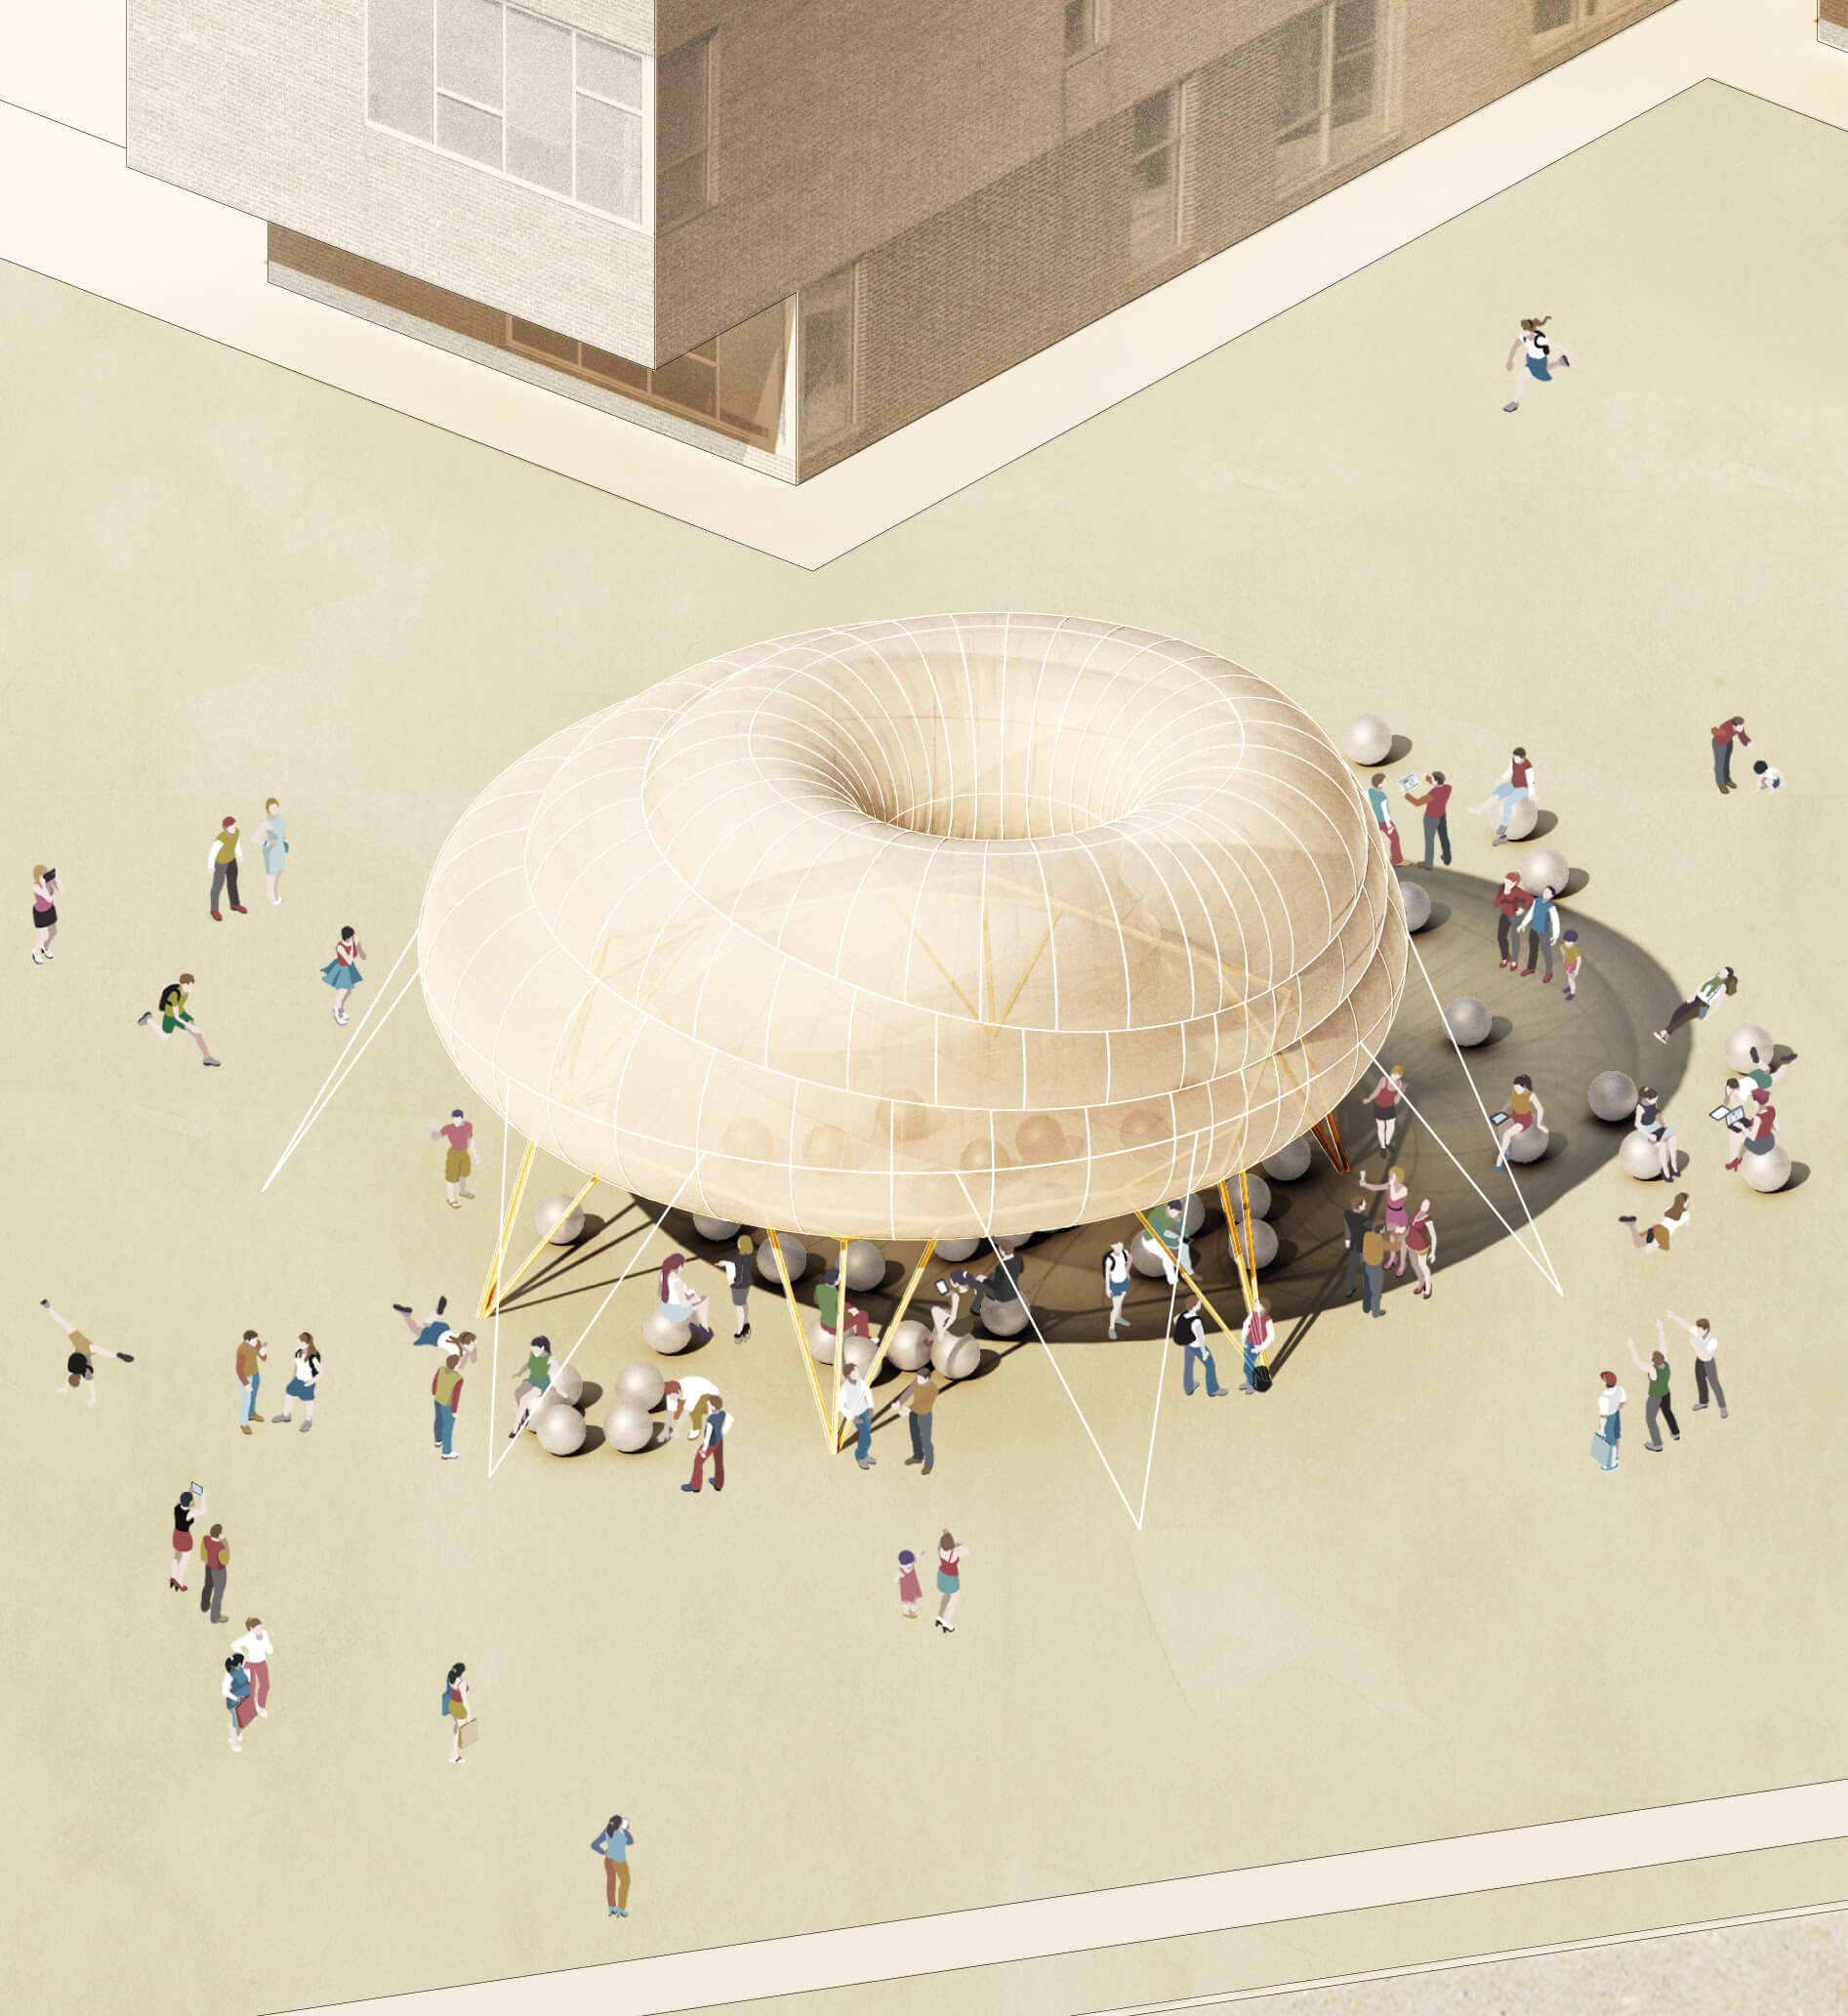 rendering of a multilayered inflatable pavilion